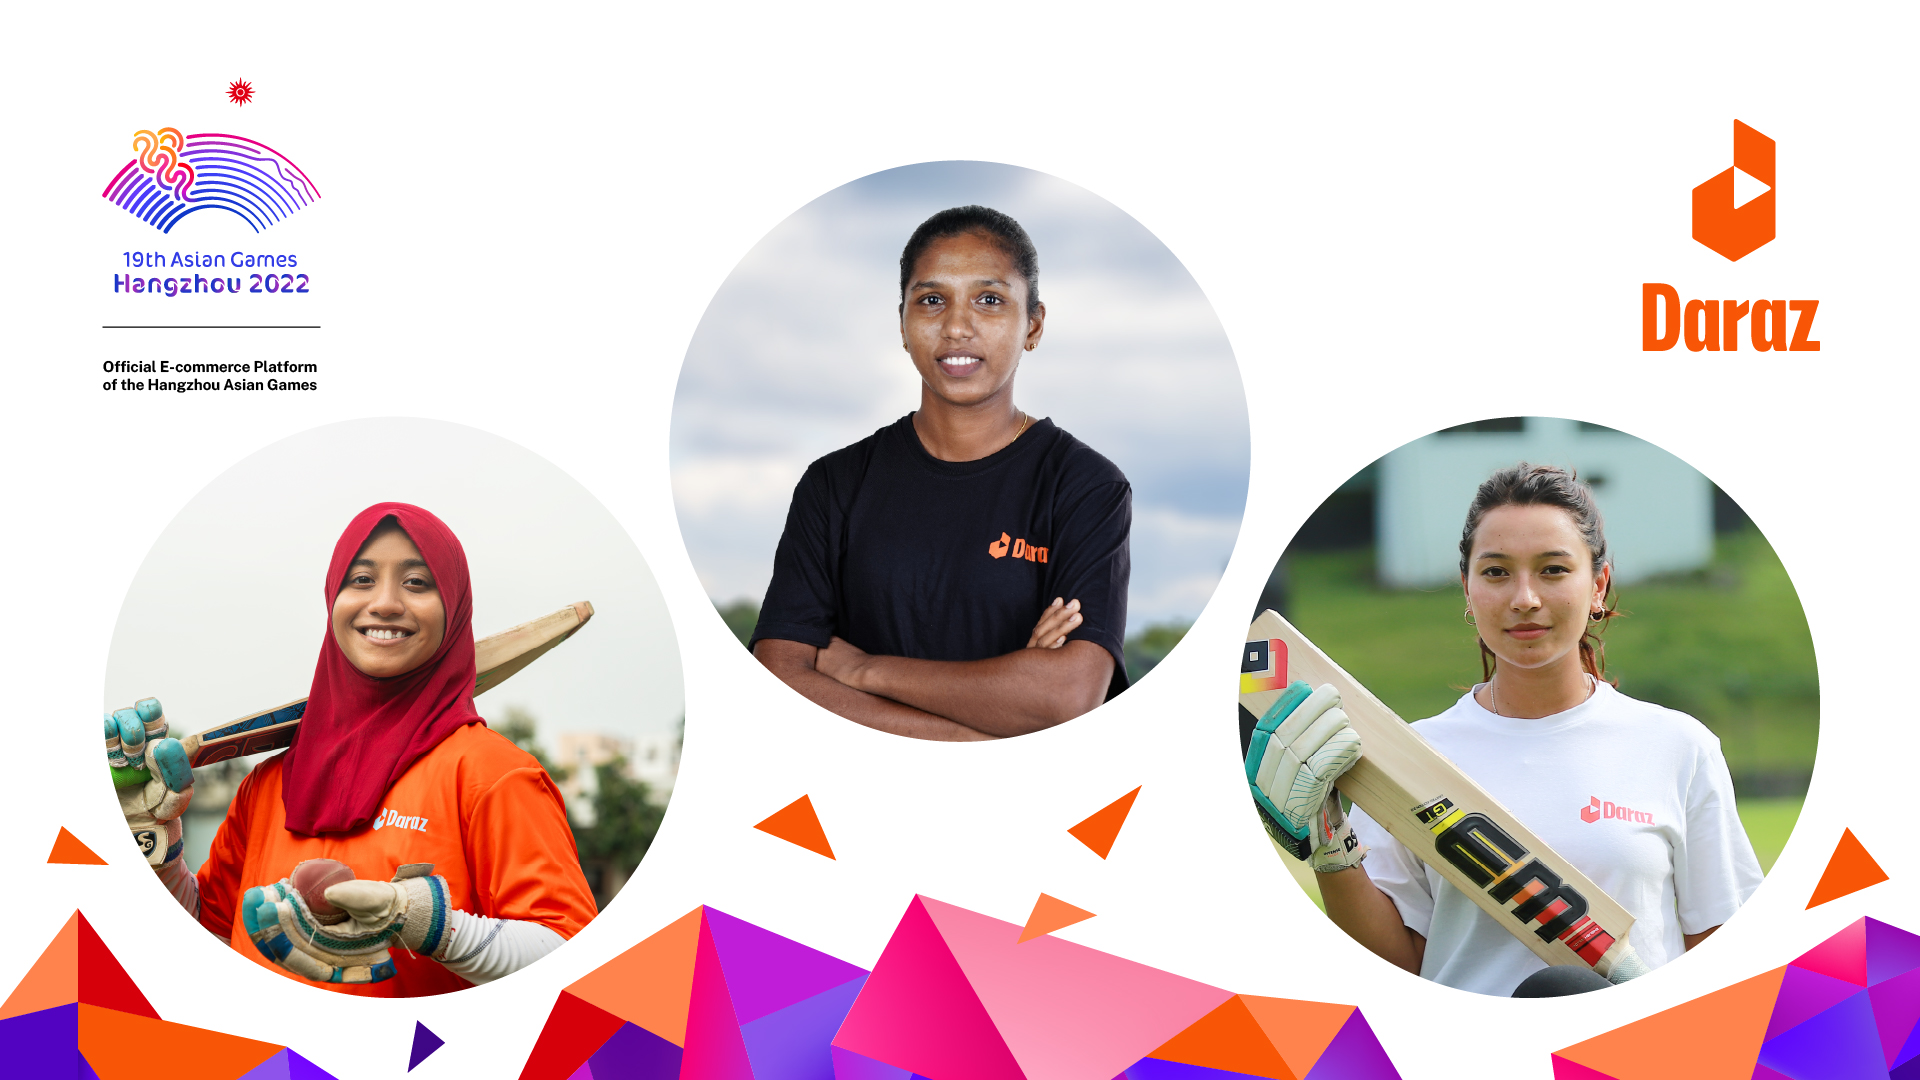 Daraz to take 3 young female cricketers from South Asia to the Asian Games